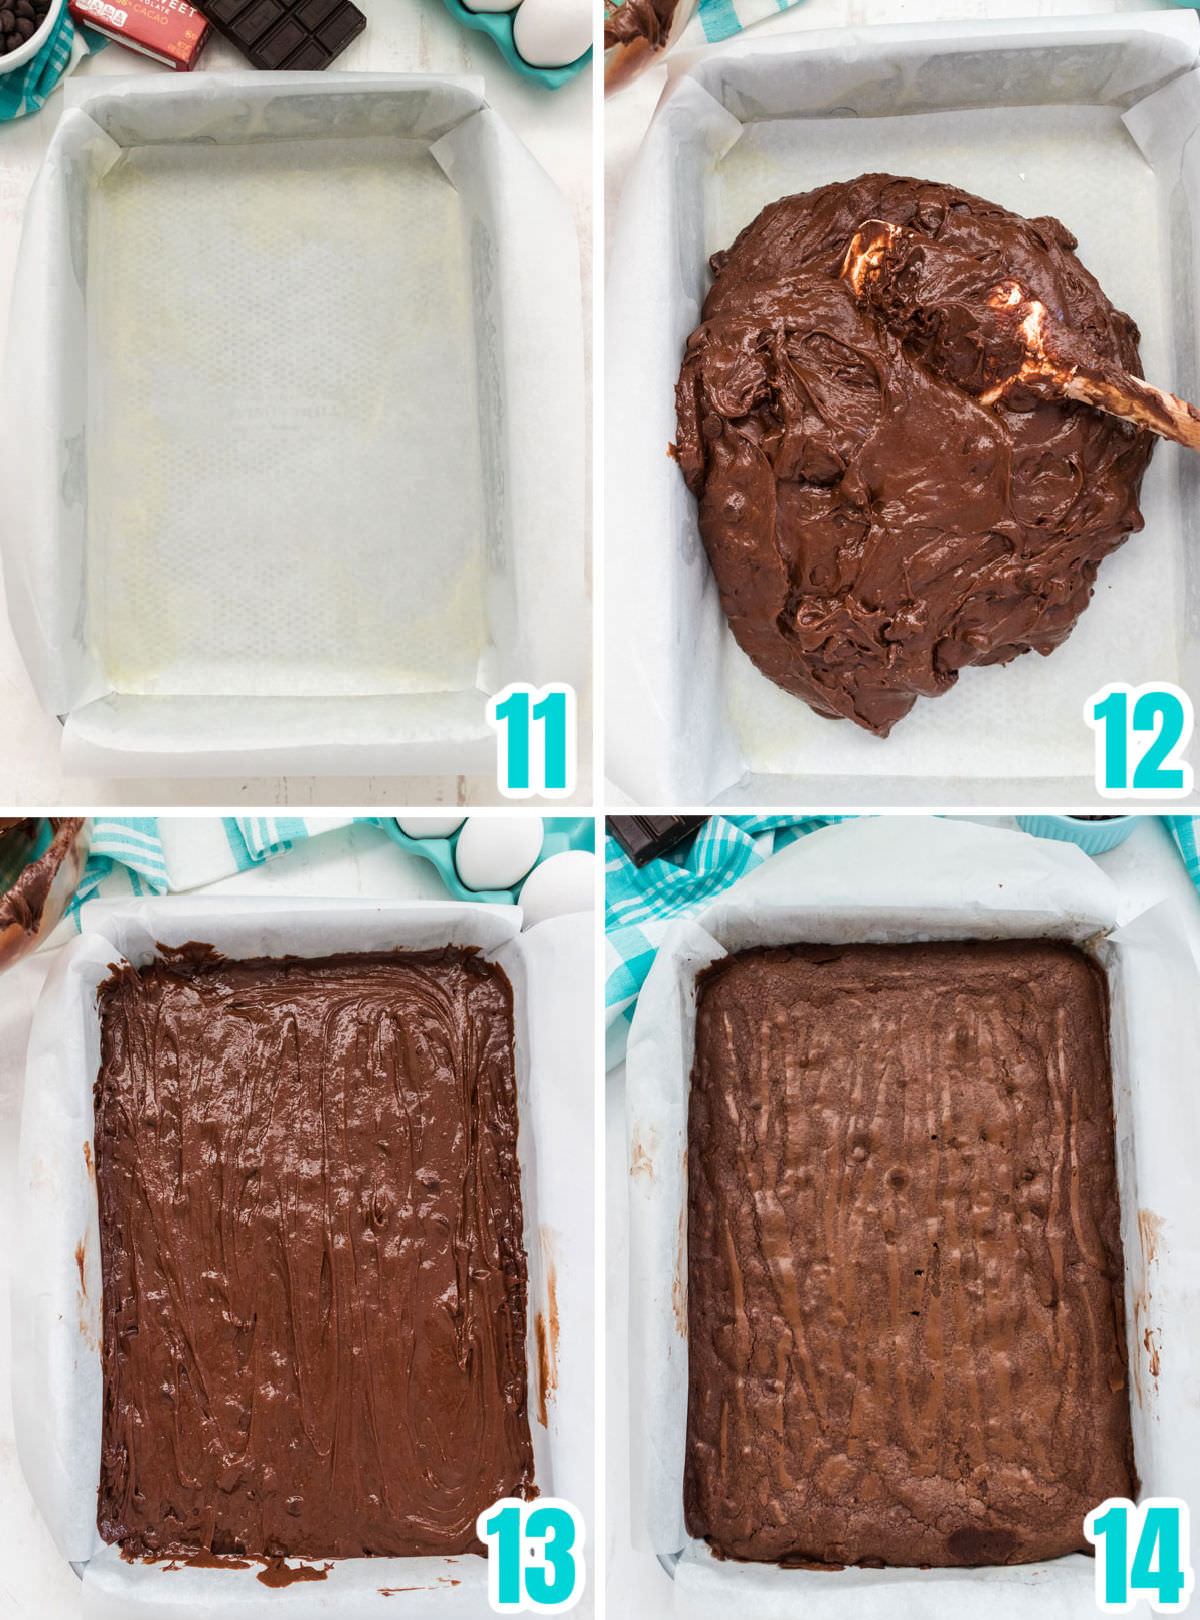 Collage image showing the steps needed to prepare the brownies for baking.